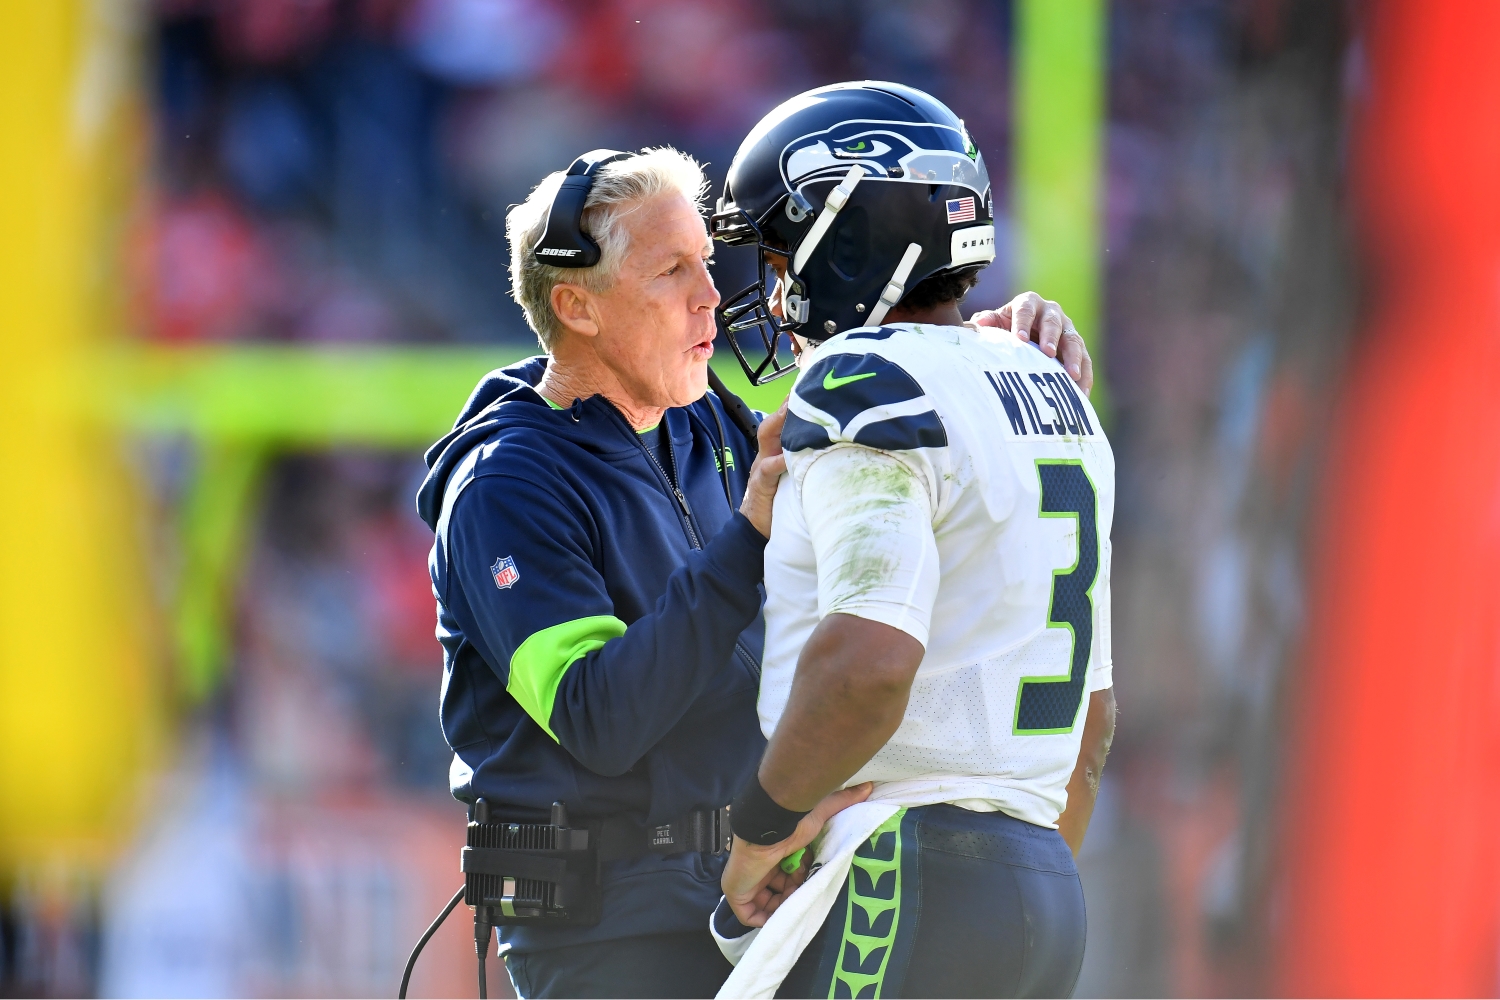 Seattle Seahawks head coach Pete Carroll talks to Russell Wilson during a game.